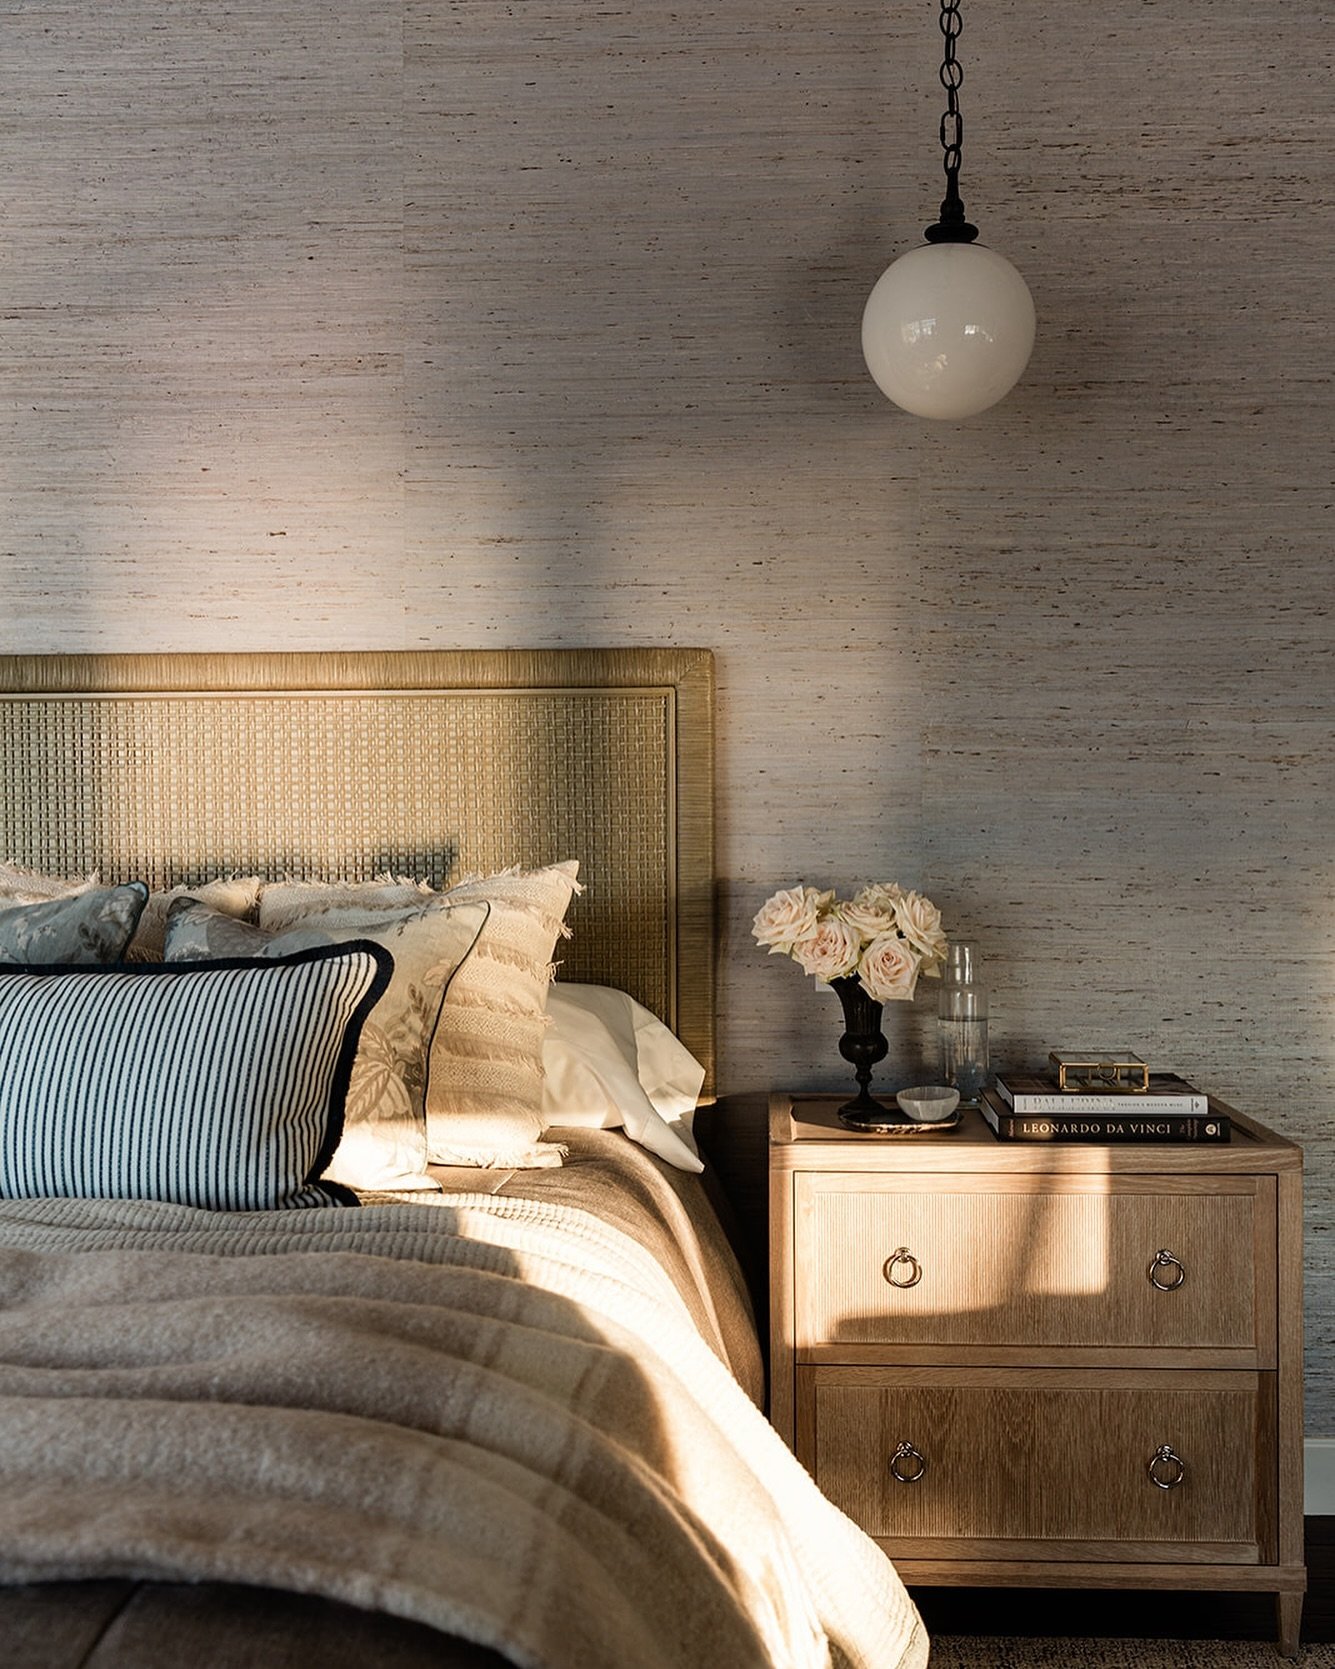 There&rsquo;s a certain magic in the way sunlight falls across this room, but that&rsquo;s not the only thing that makes this primary bedroom special. ✨

The warm glow accentuates the textured wall covering and illuminates all the special details, fr